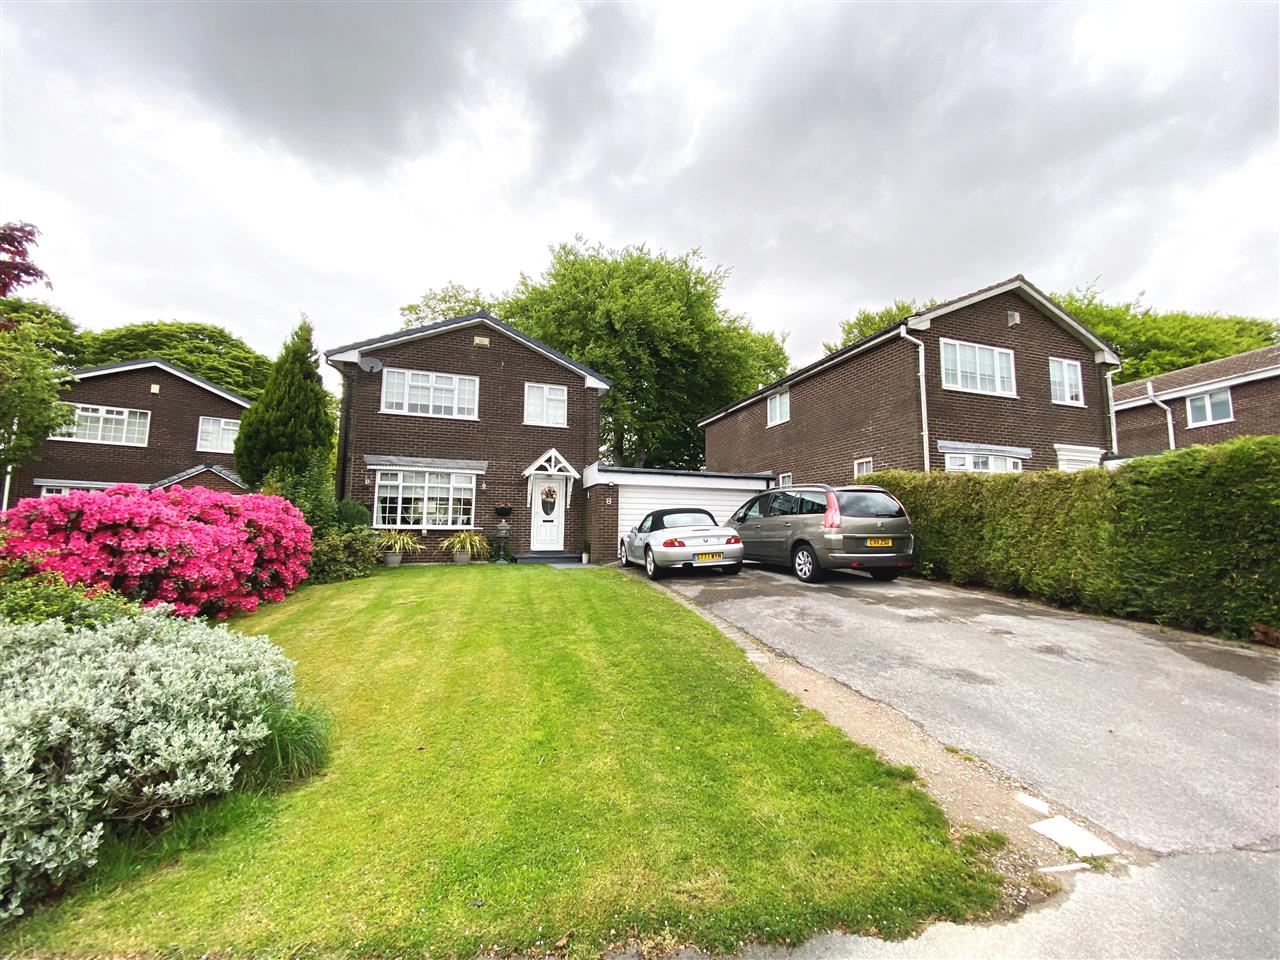 4 bed detached for sale in Ridgmont Close, Horwich - Property Image 1